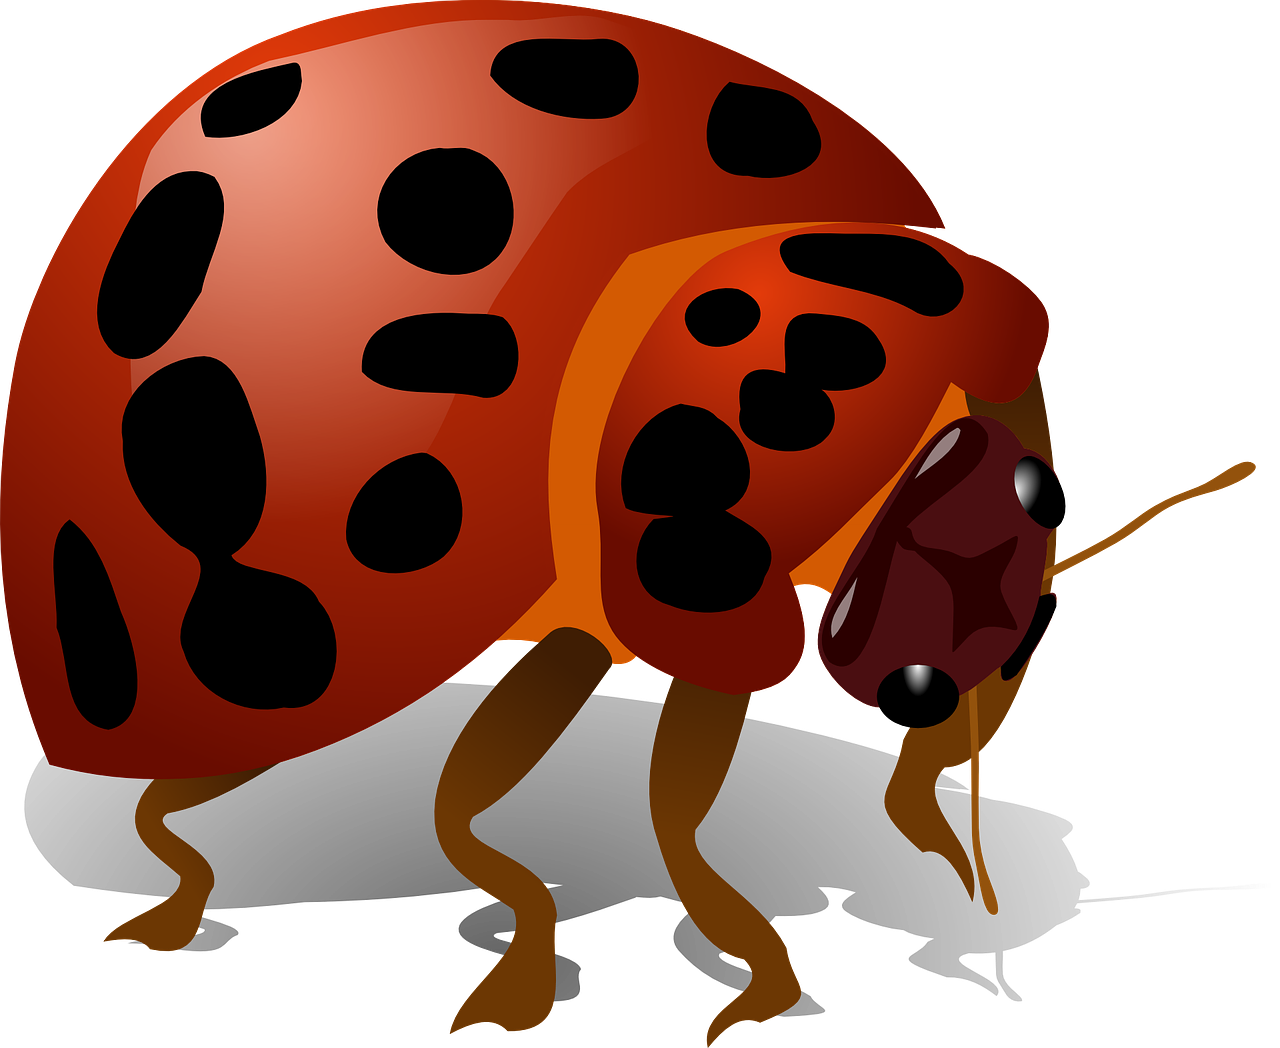 ladybug,bug,insect,red,ladybird,macro,free vector graphics,free pictures, free photos, free images, royalty free, free illustrations, public domain